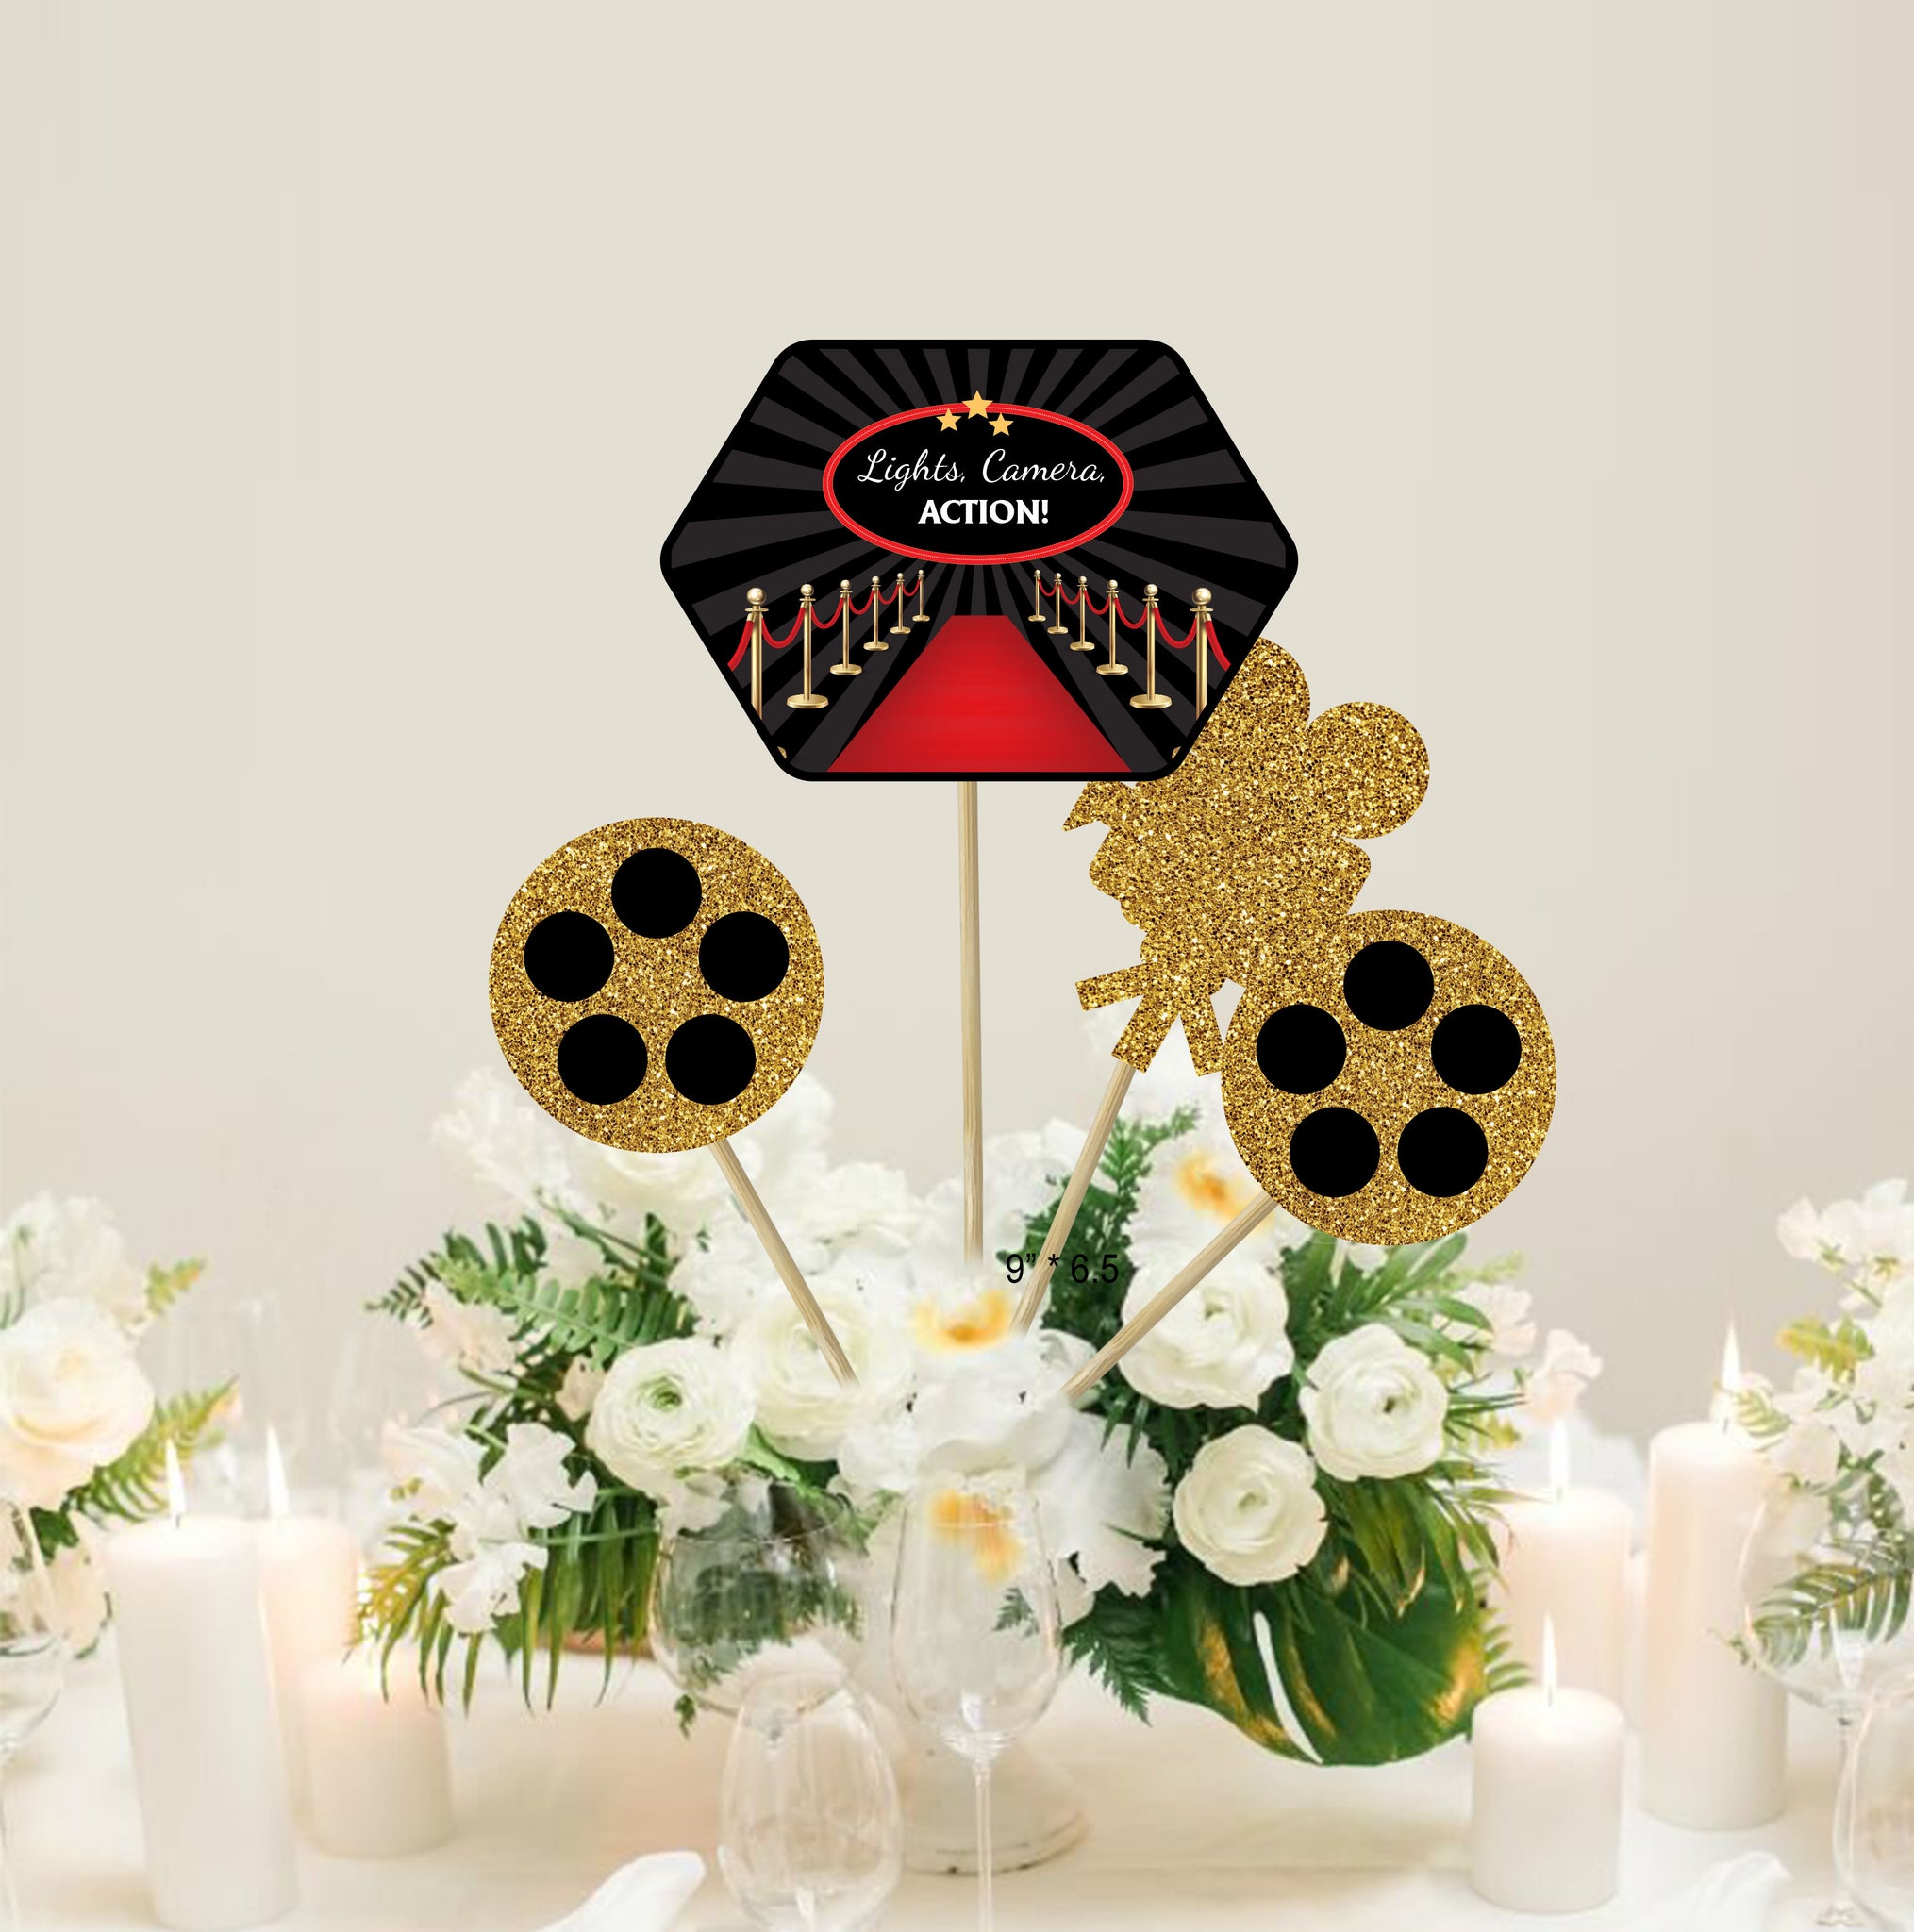 Hollywood Theme Centerpieces from Life O' The Party - mazelmoments.com  Hollywood  party theme, Hollywood birthday parties, Movie themed party